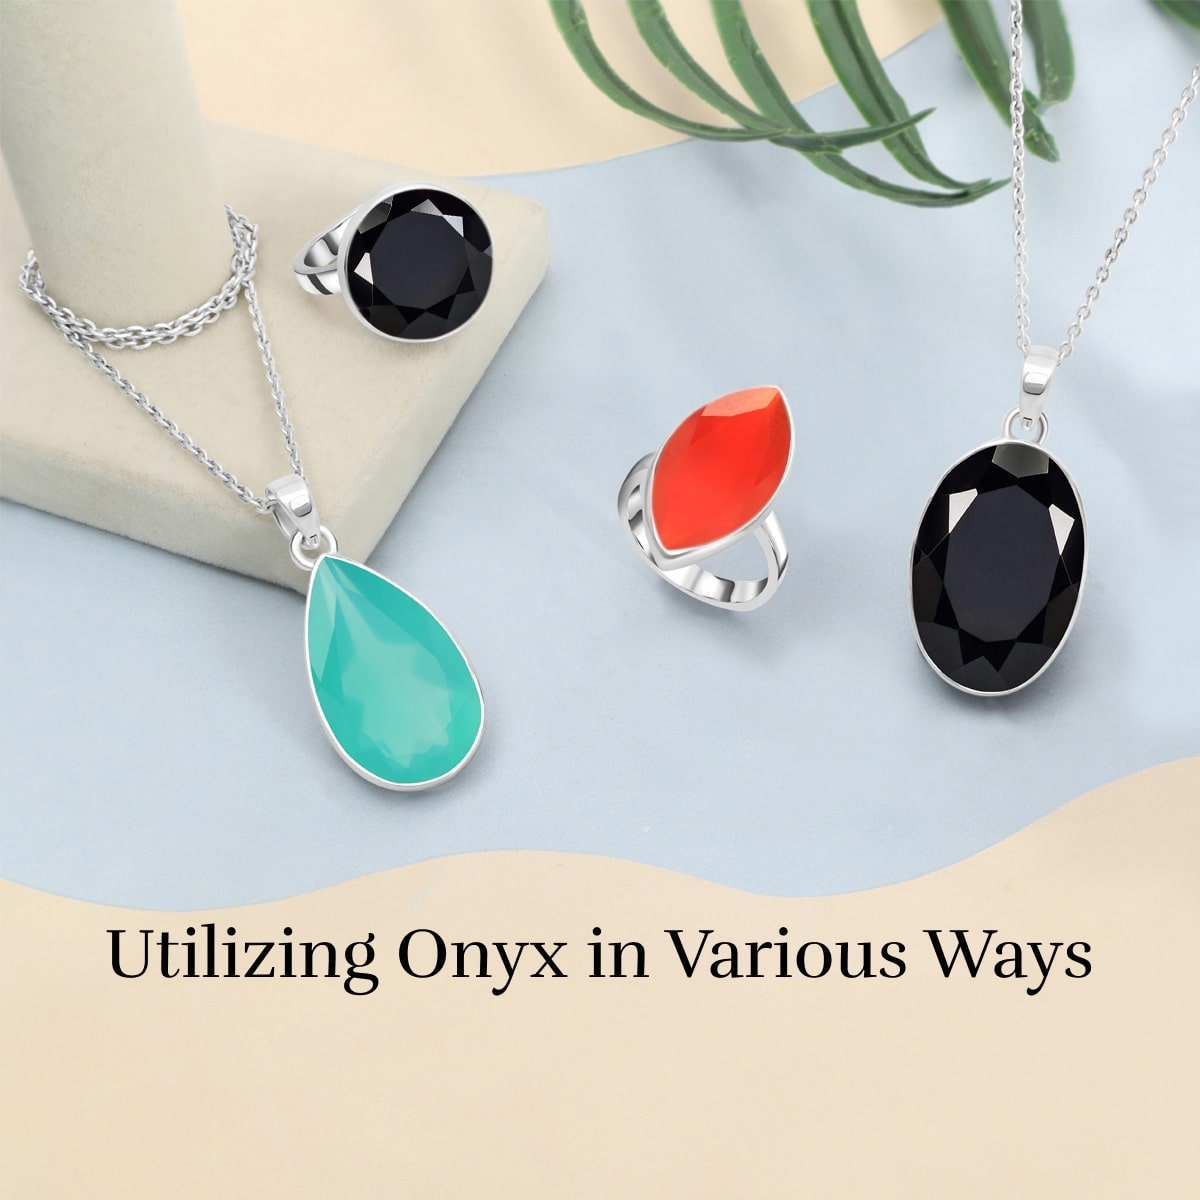 Different Uses of Onyx